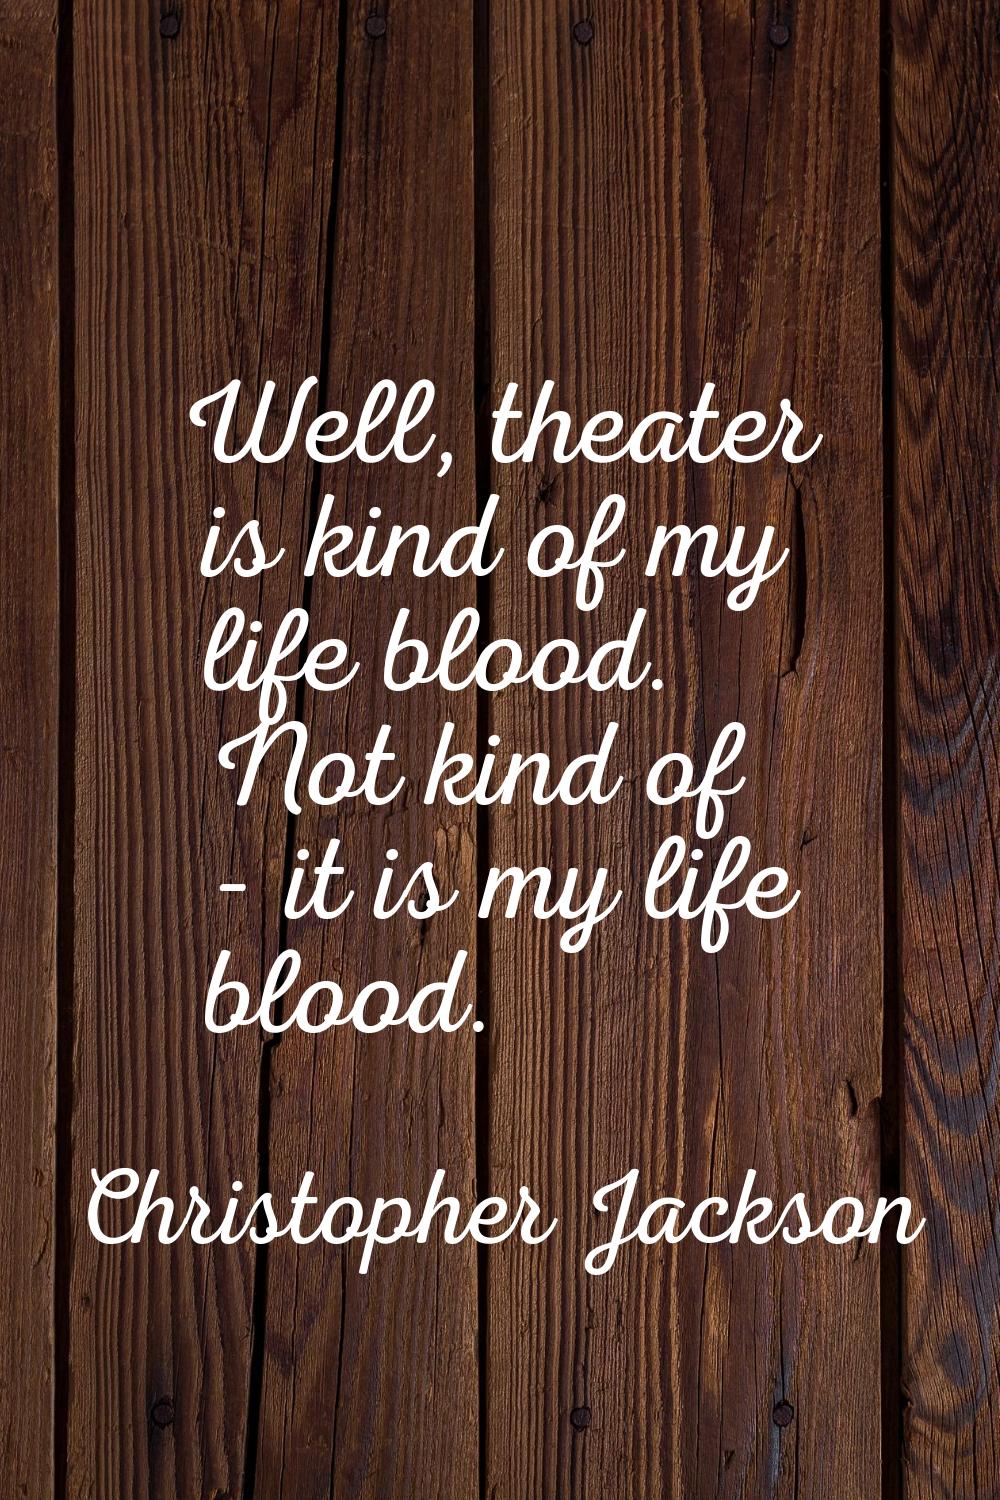 Well, theater is kind of my life blood. Not kind of - it is my life blood.